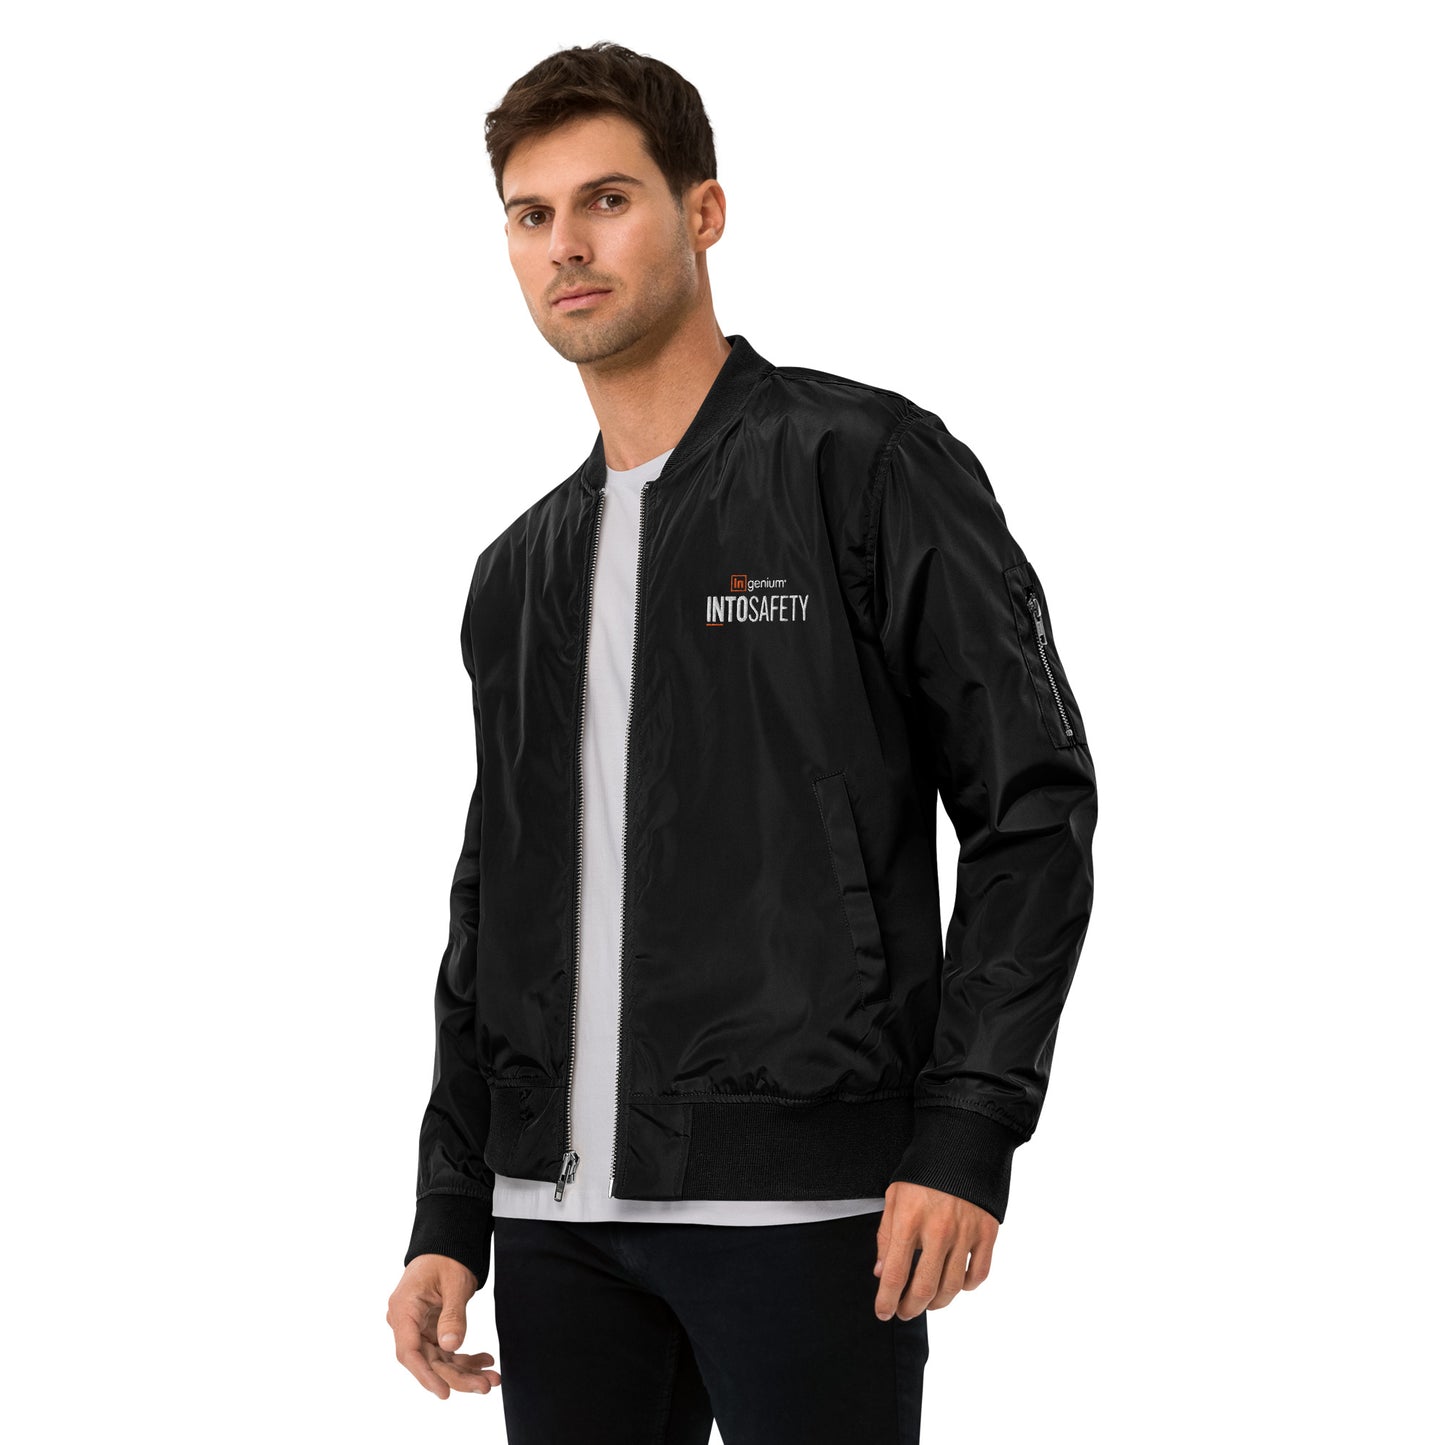 Premium recycled bomber jacket - Safety Team